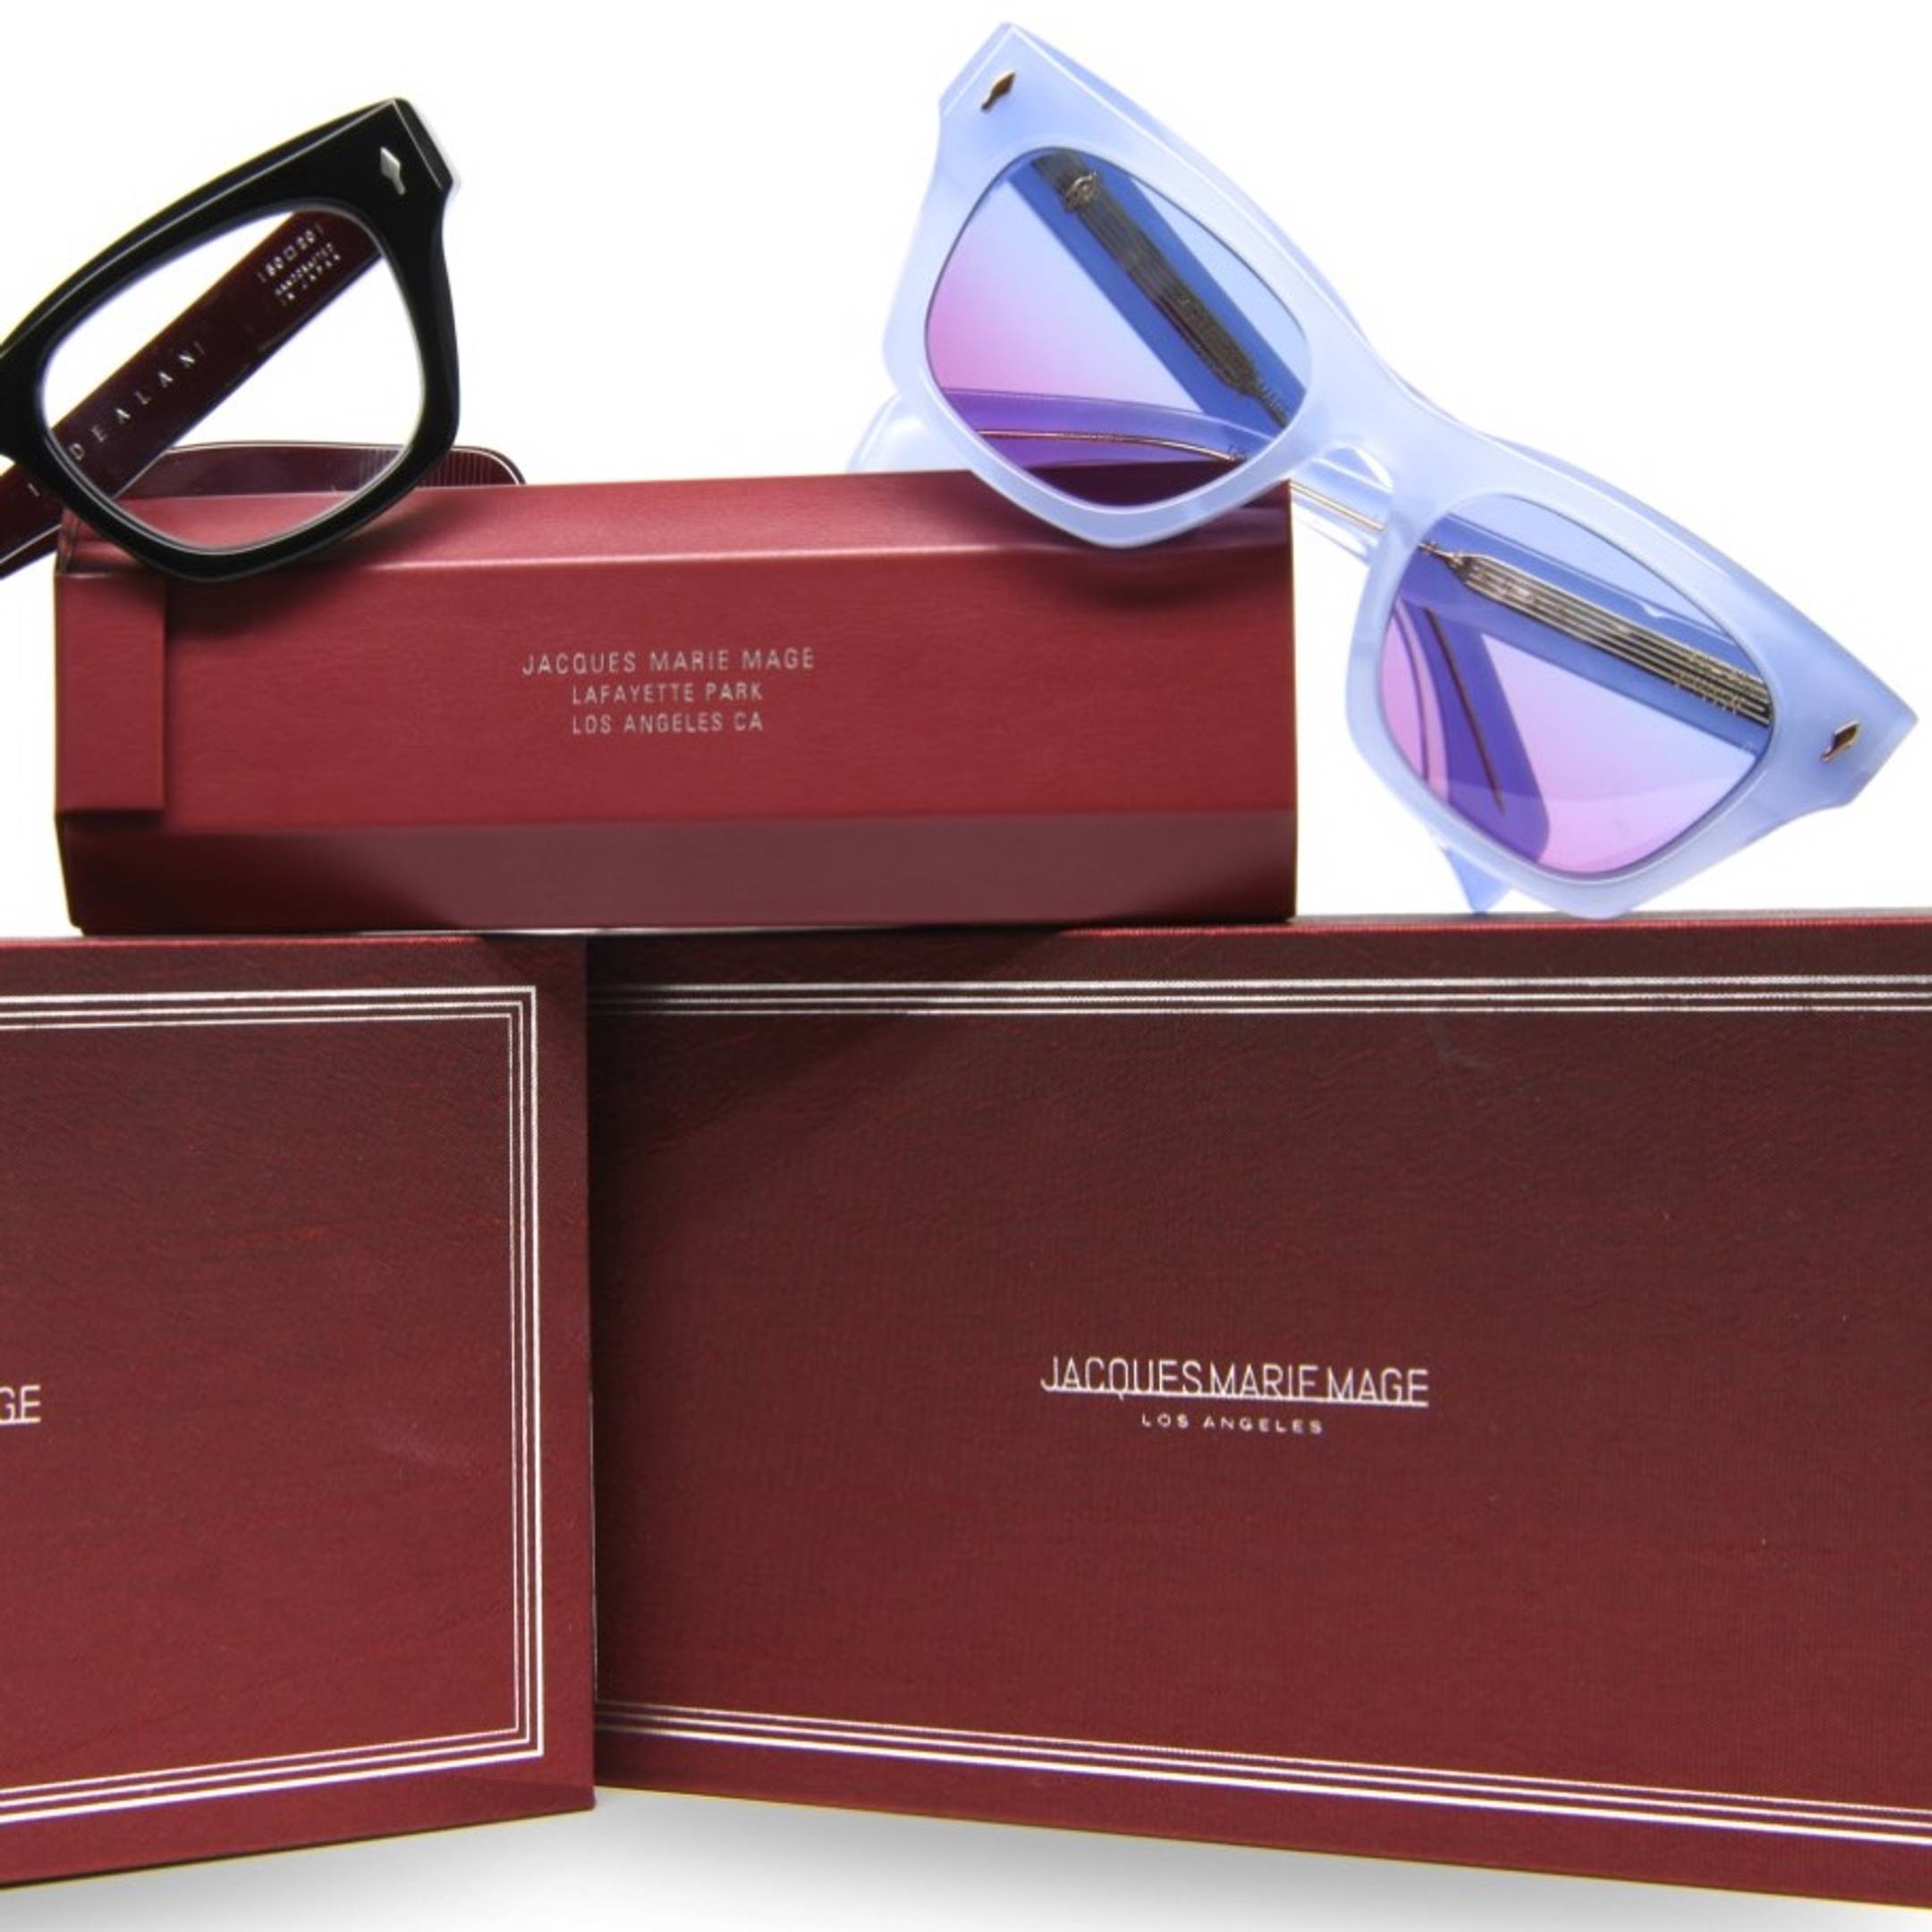 Two Jacques Marie Mage eyeglasses on collectors' cases.